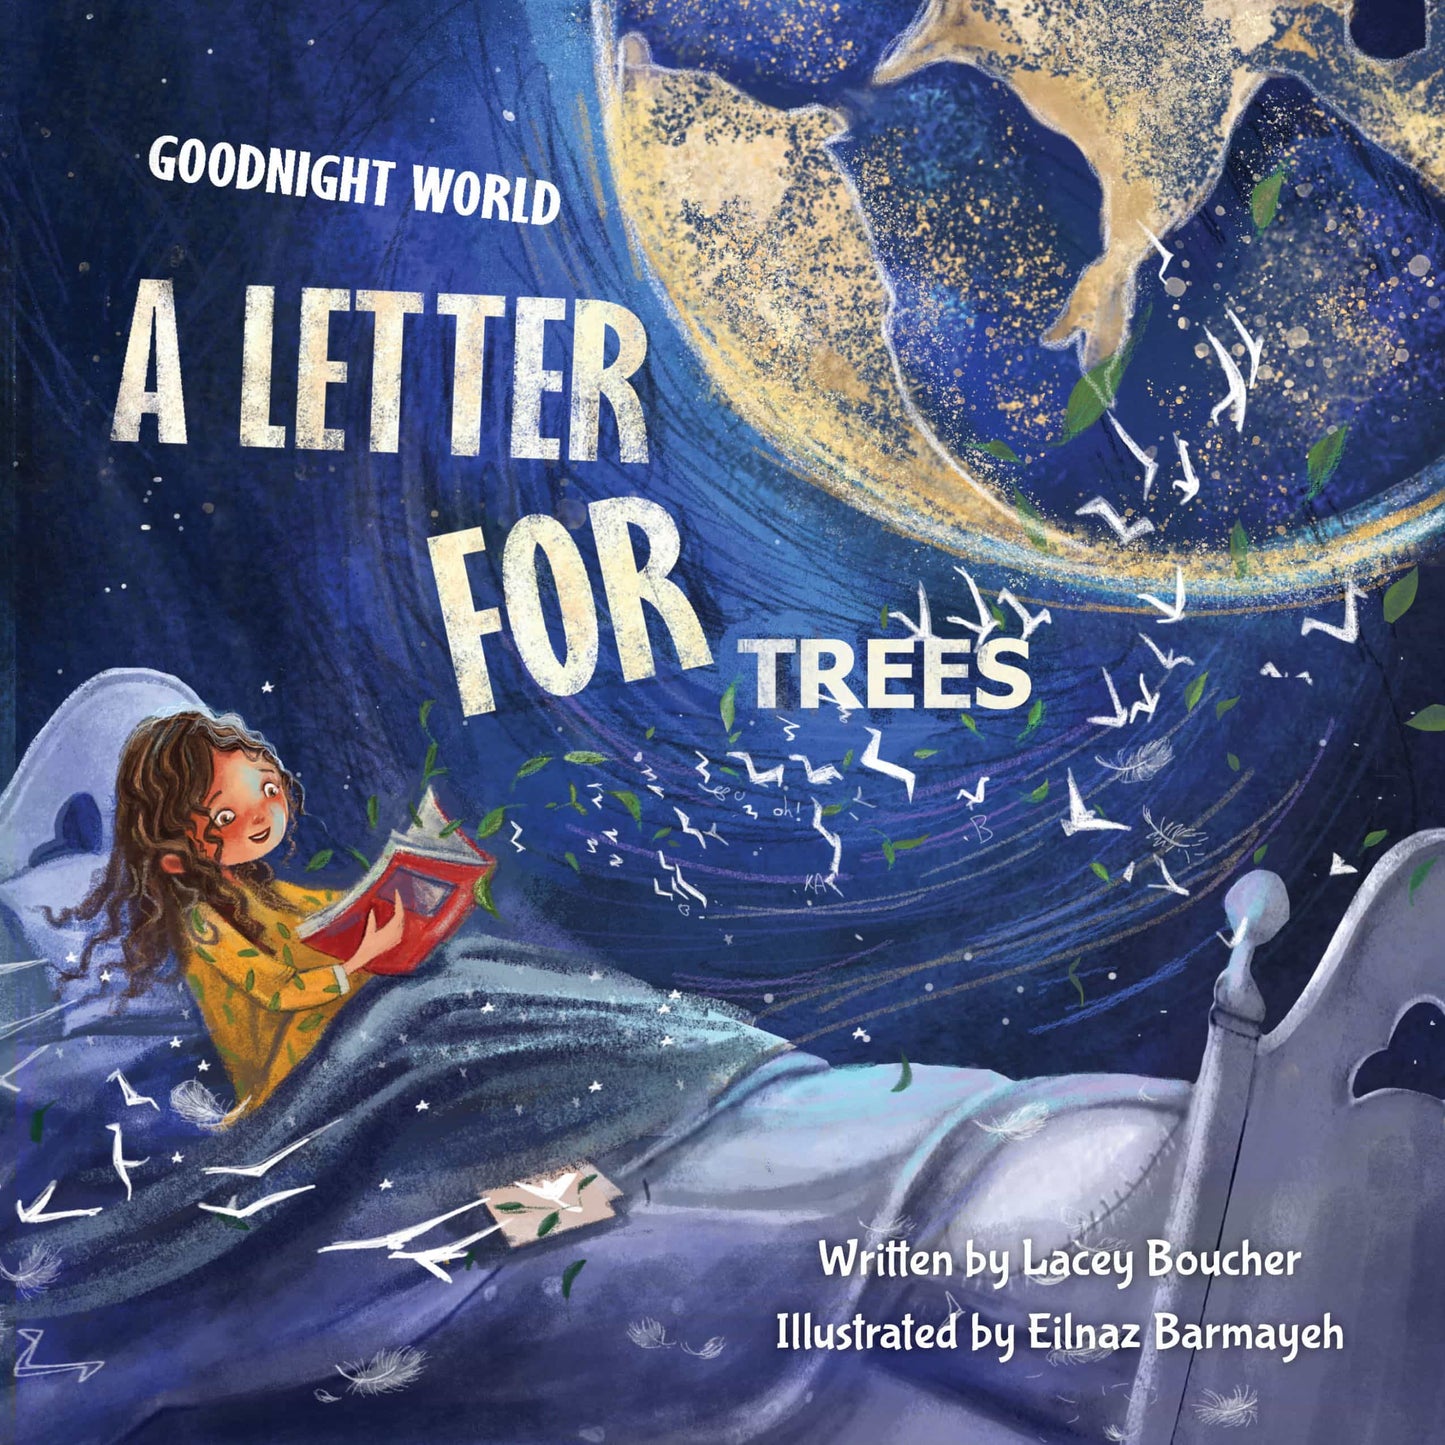 Goodnight World: A Letter for Trees